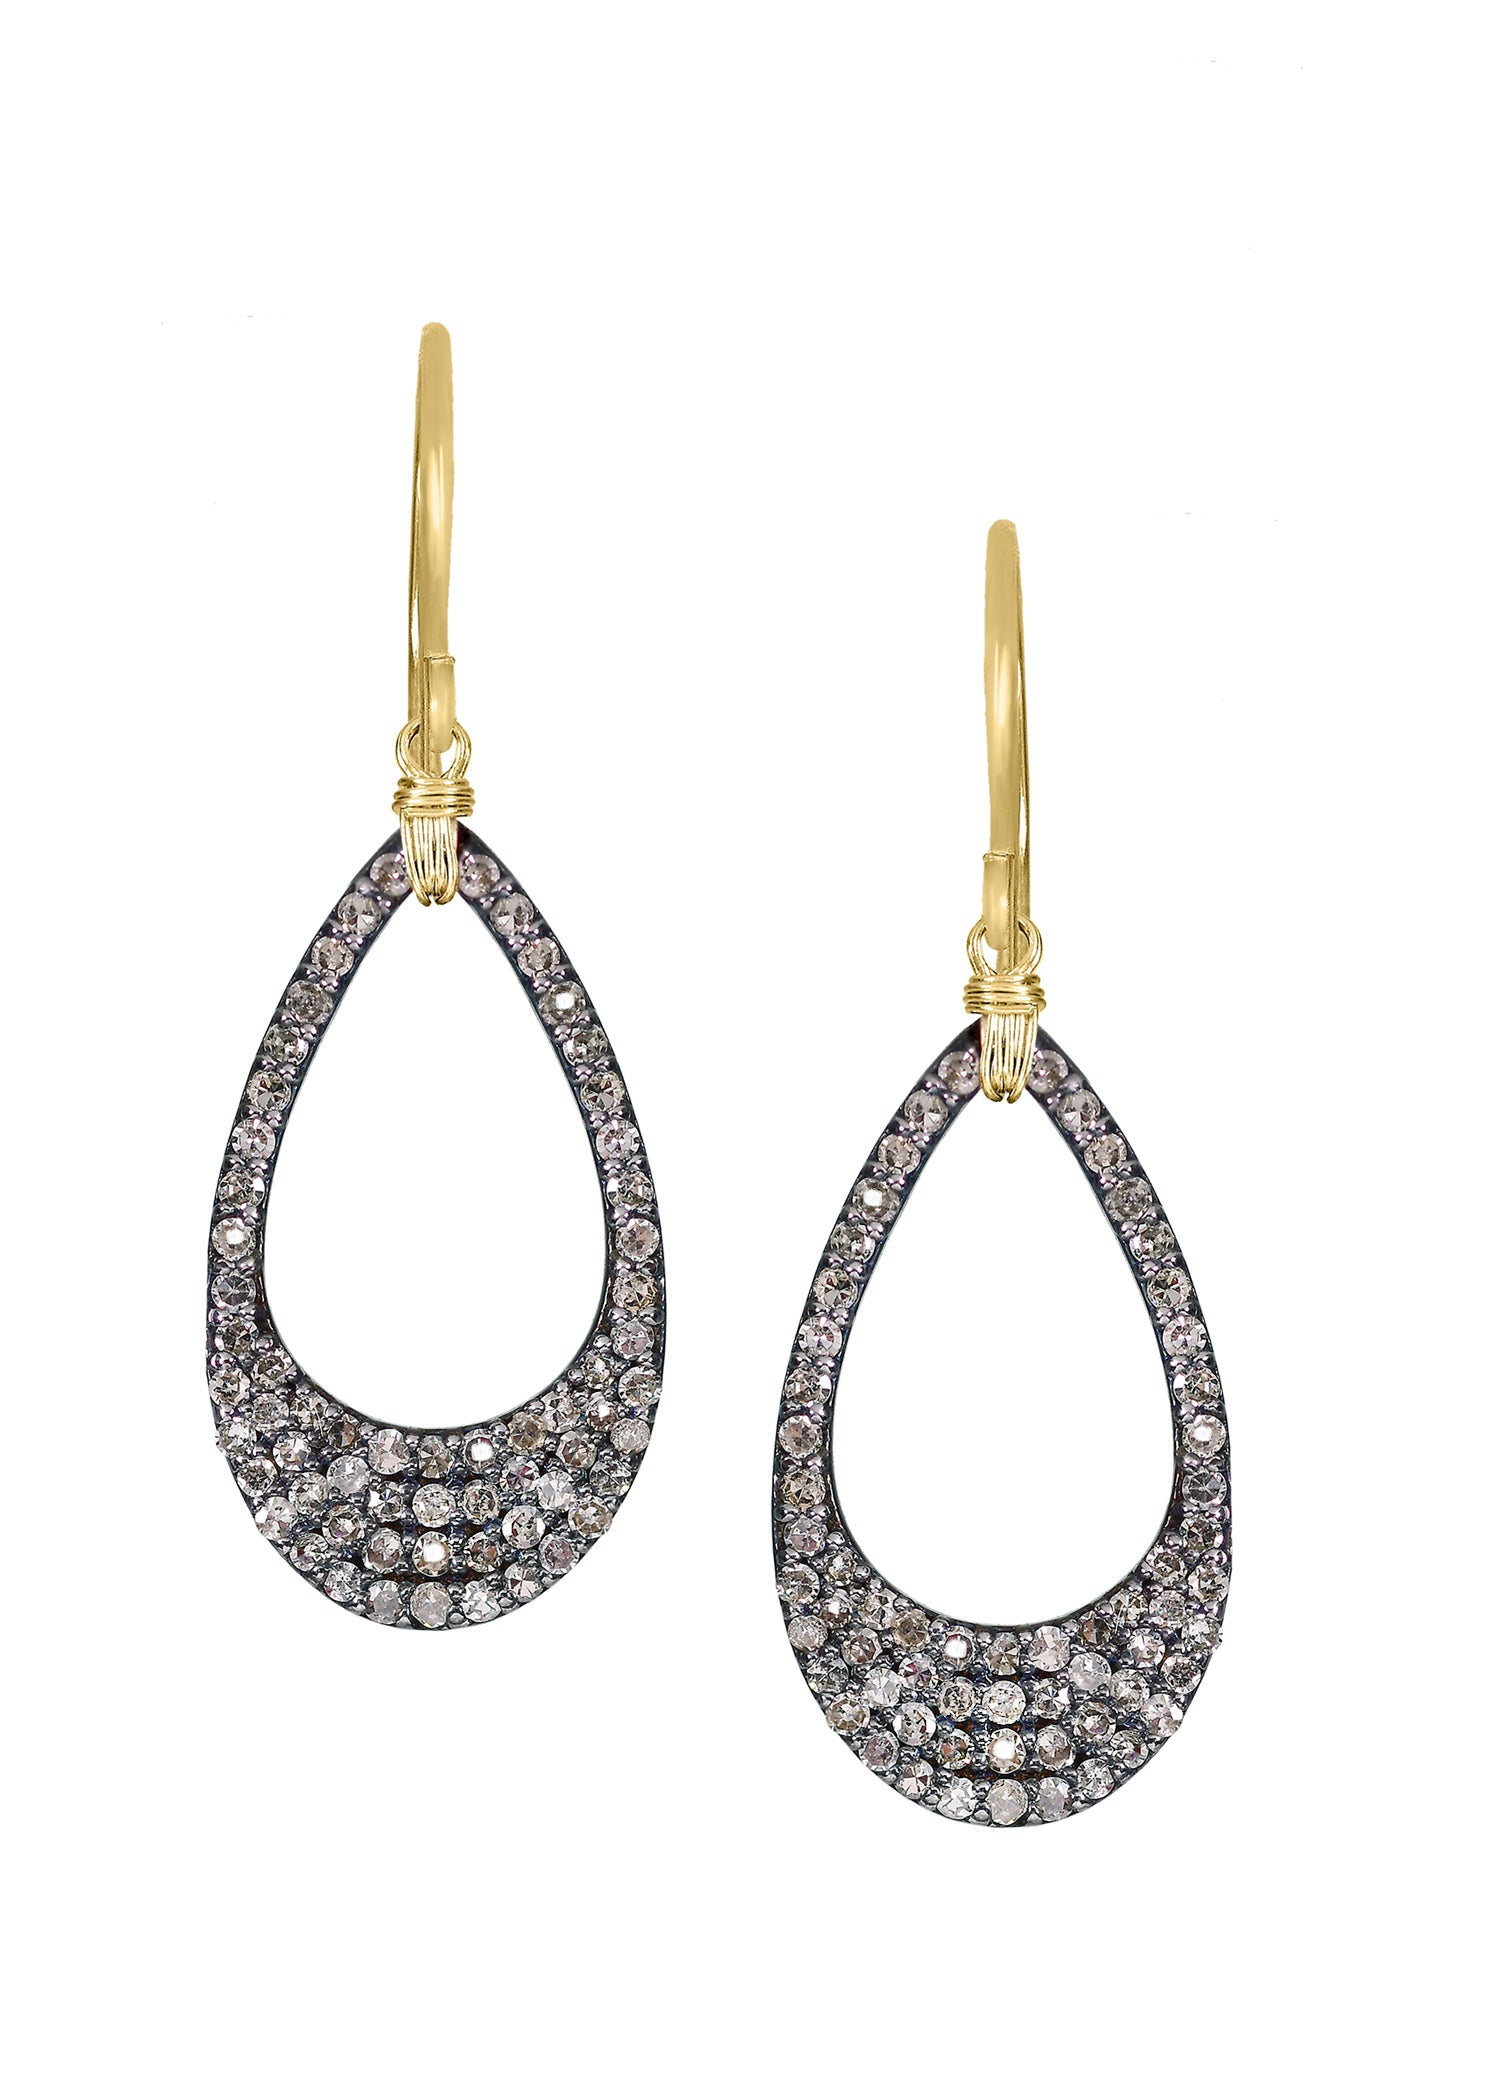 Diamond 14k gold Sterling silver Mixed metal Earrings measure 1-5/16" in length (including the ear wires) and 1/2" in width at the widest point Special order only Handmade in our Los Angeles studio